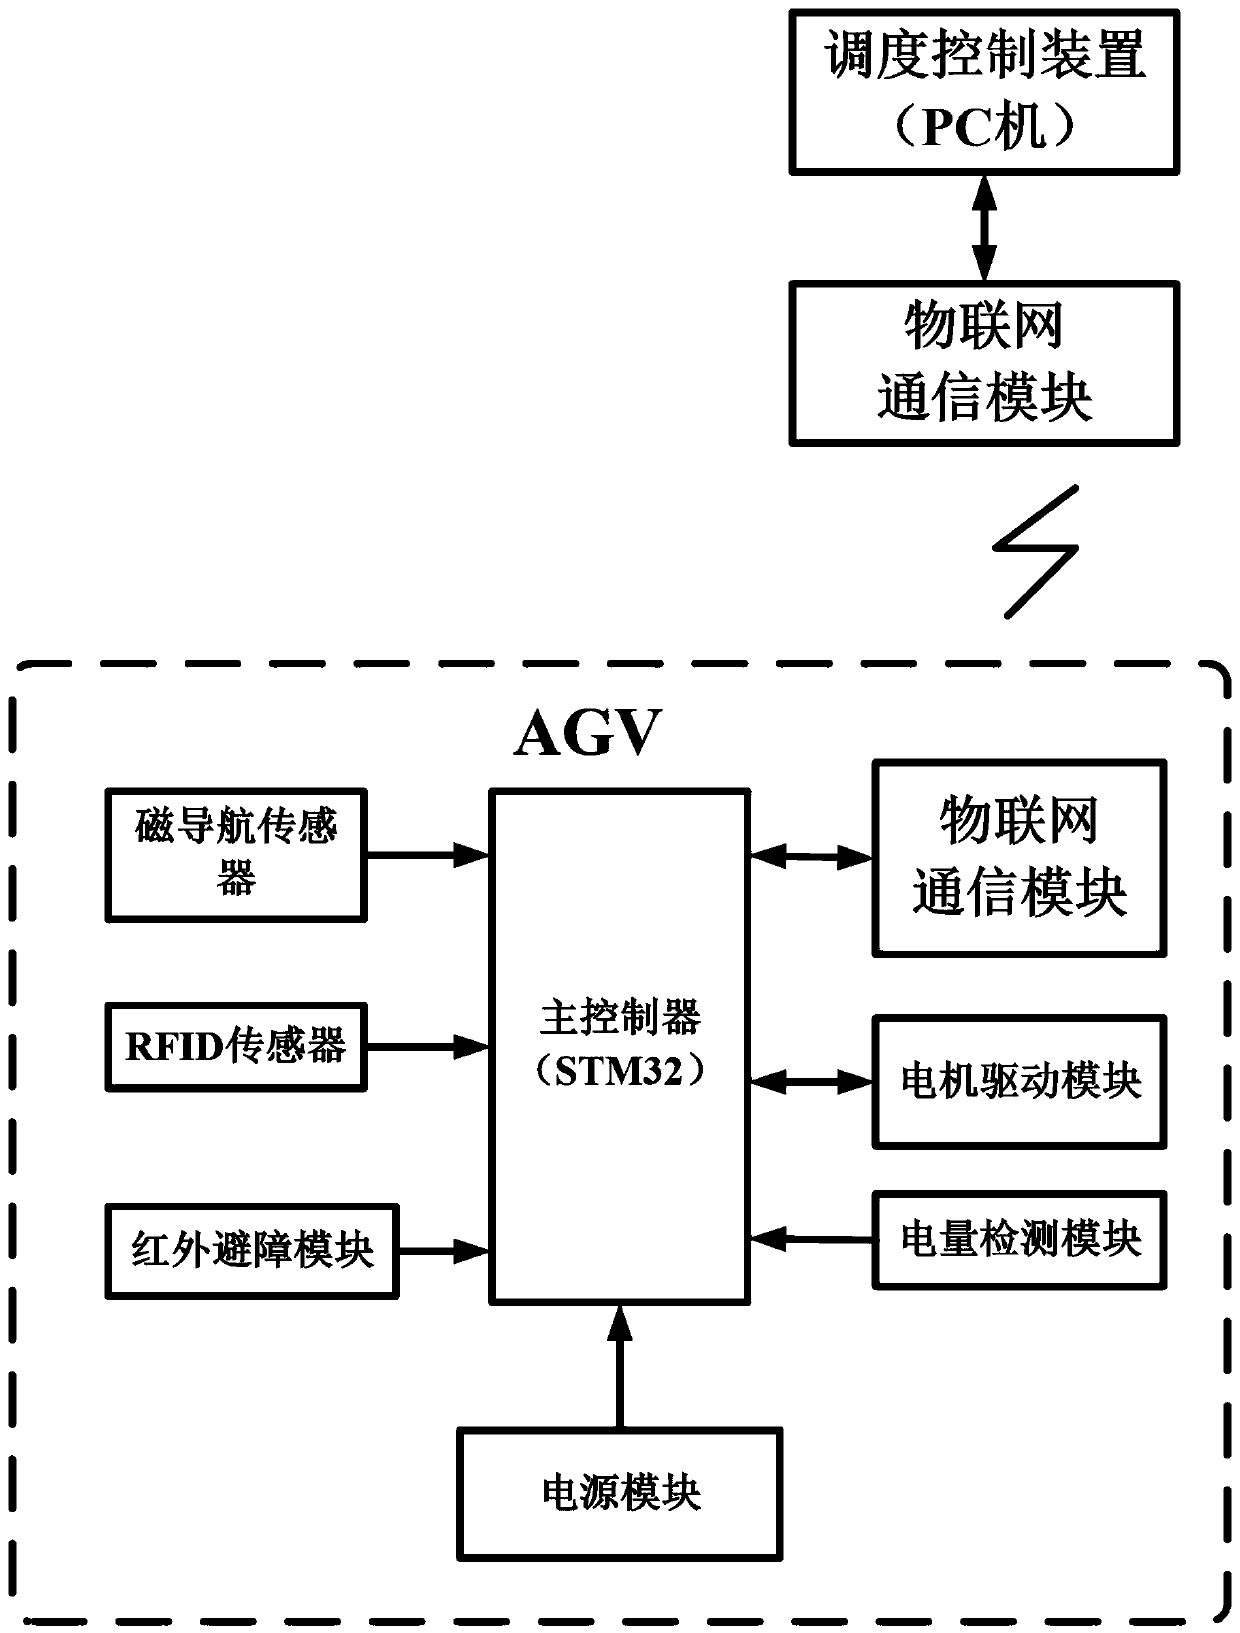 Multi-AGV collision-free operation path planning method and scheduling system